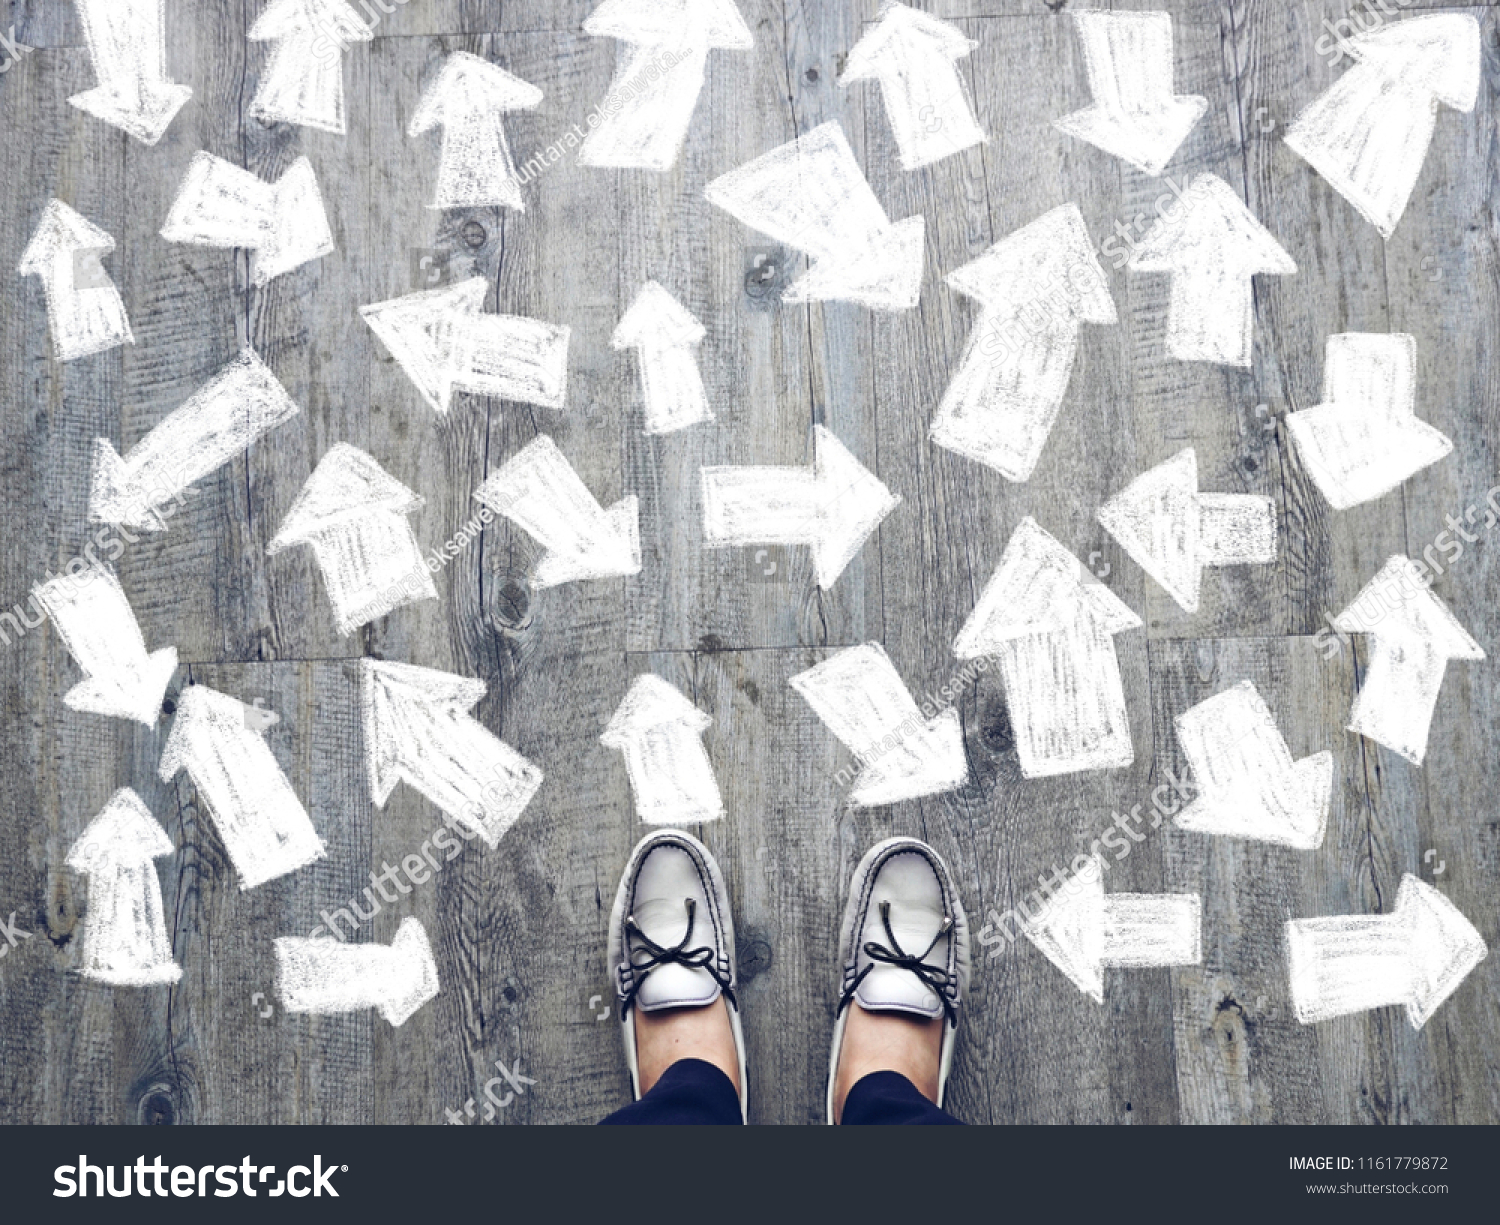 Top view of selfie feet on wooden floor background with white drawn many direction arrows , decision making , Choices concept, where to go, directions, business solutions #1161779872